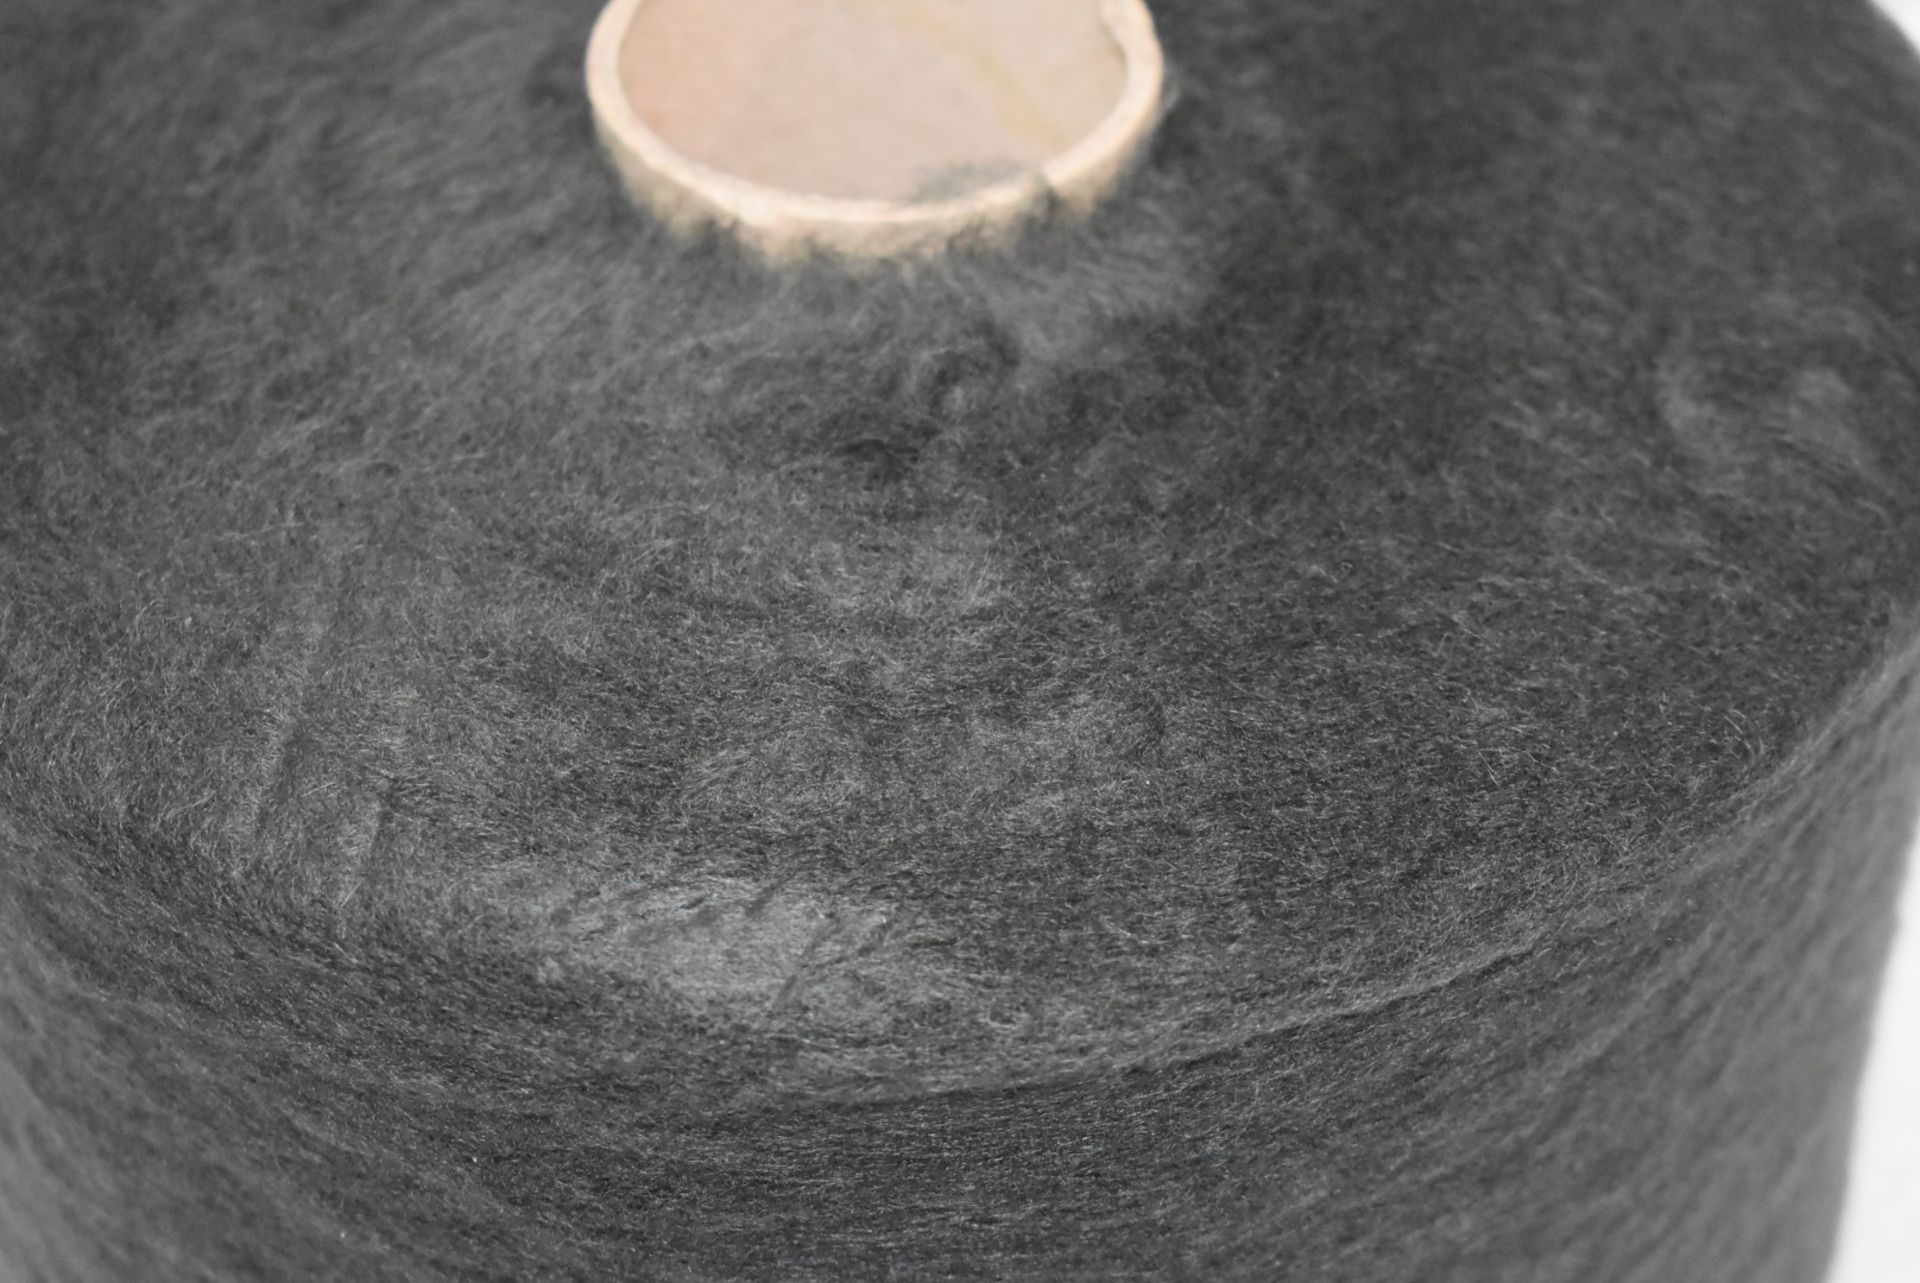 6 x Cones of 1/7,5 Lagona Knitting Yarn - Charcoal - Approx Weight: 2,300g - New Stock ABL Yarn - Image 6 of 9